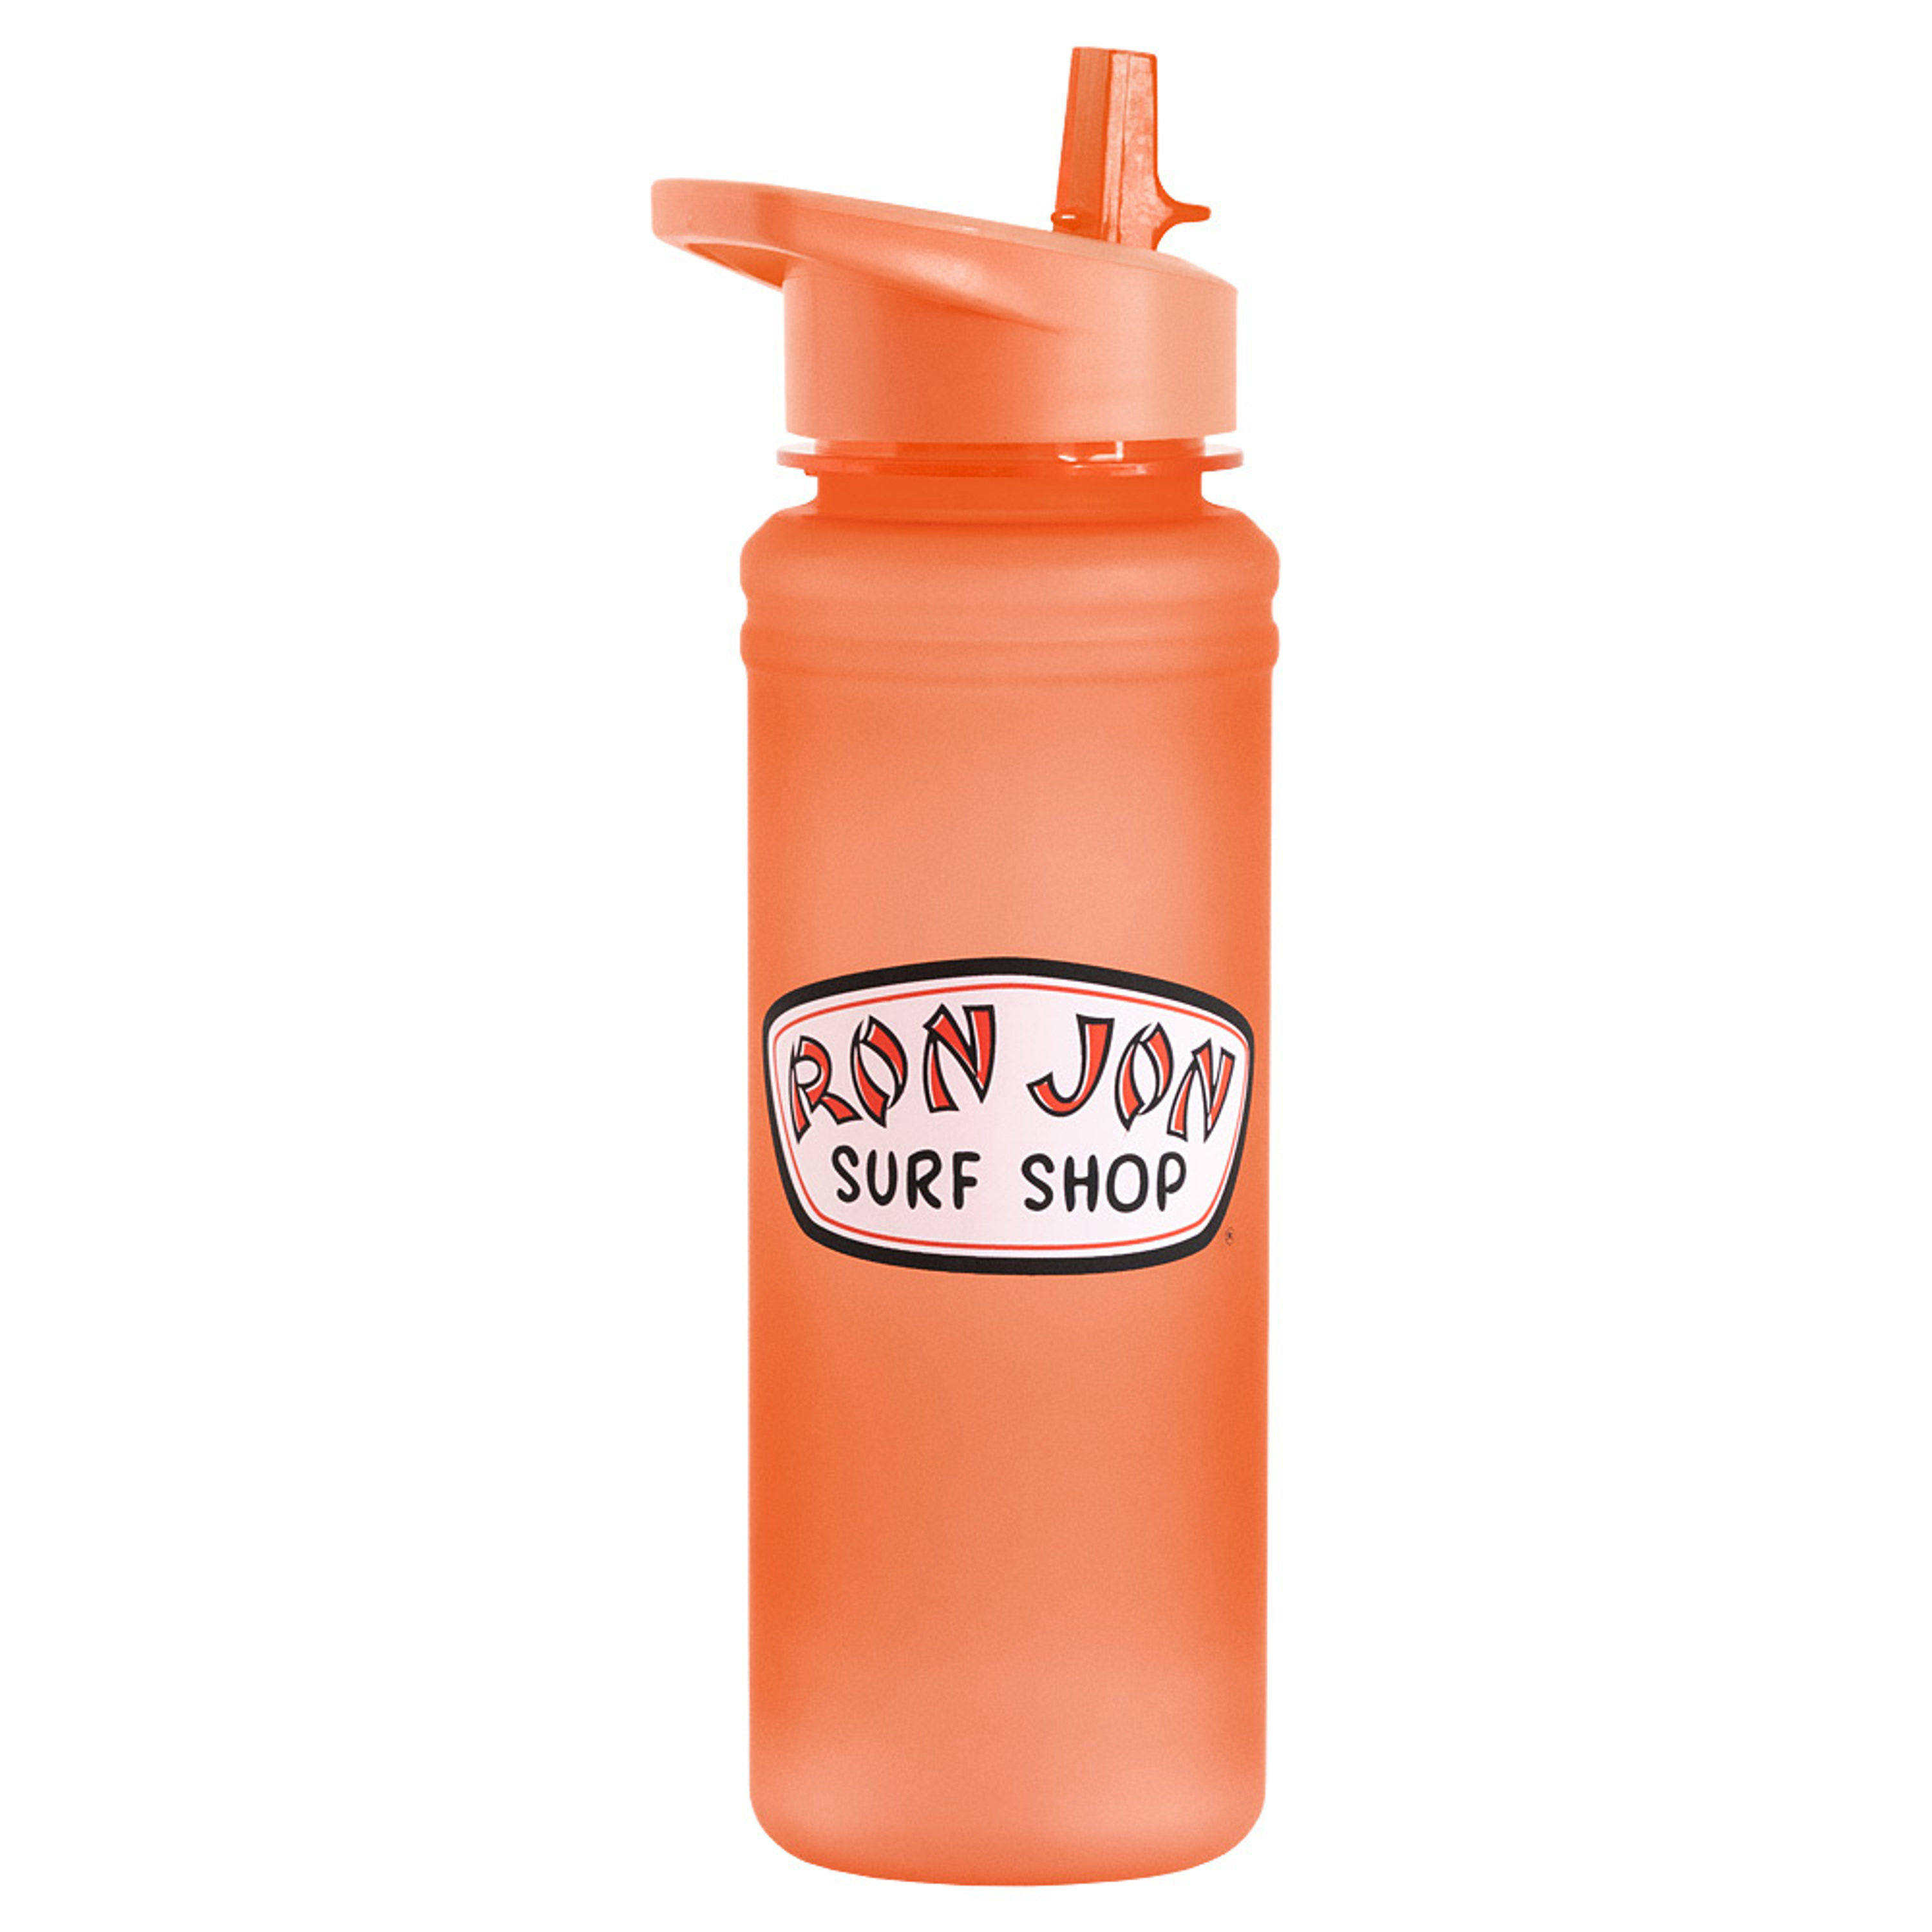 https://www.ronjonsurfshop.com/assets/d2/c9/d2c9eb18-aa73-4044-aad9-e2d5f43337ab/d3000x3000-10820659000-ron-jon-coral-frosted-water-bottle-front.jpg